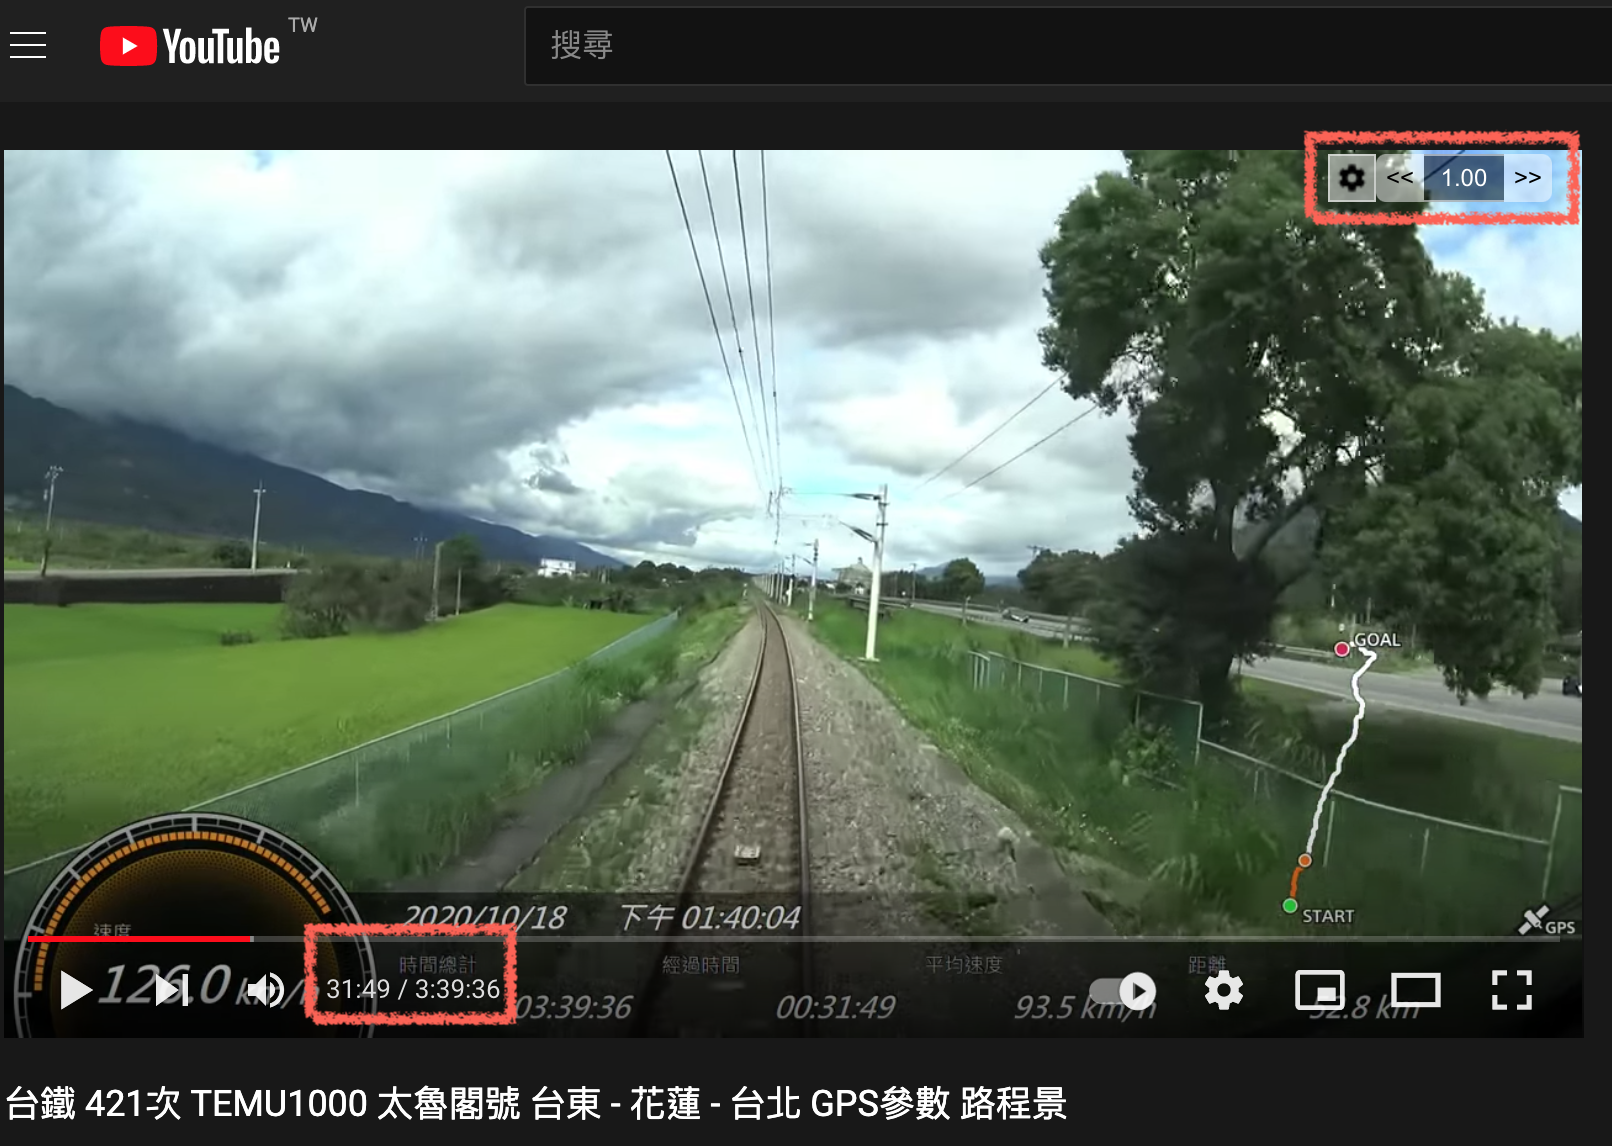 Youtube Playback Speed Control